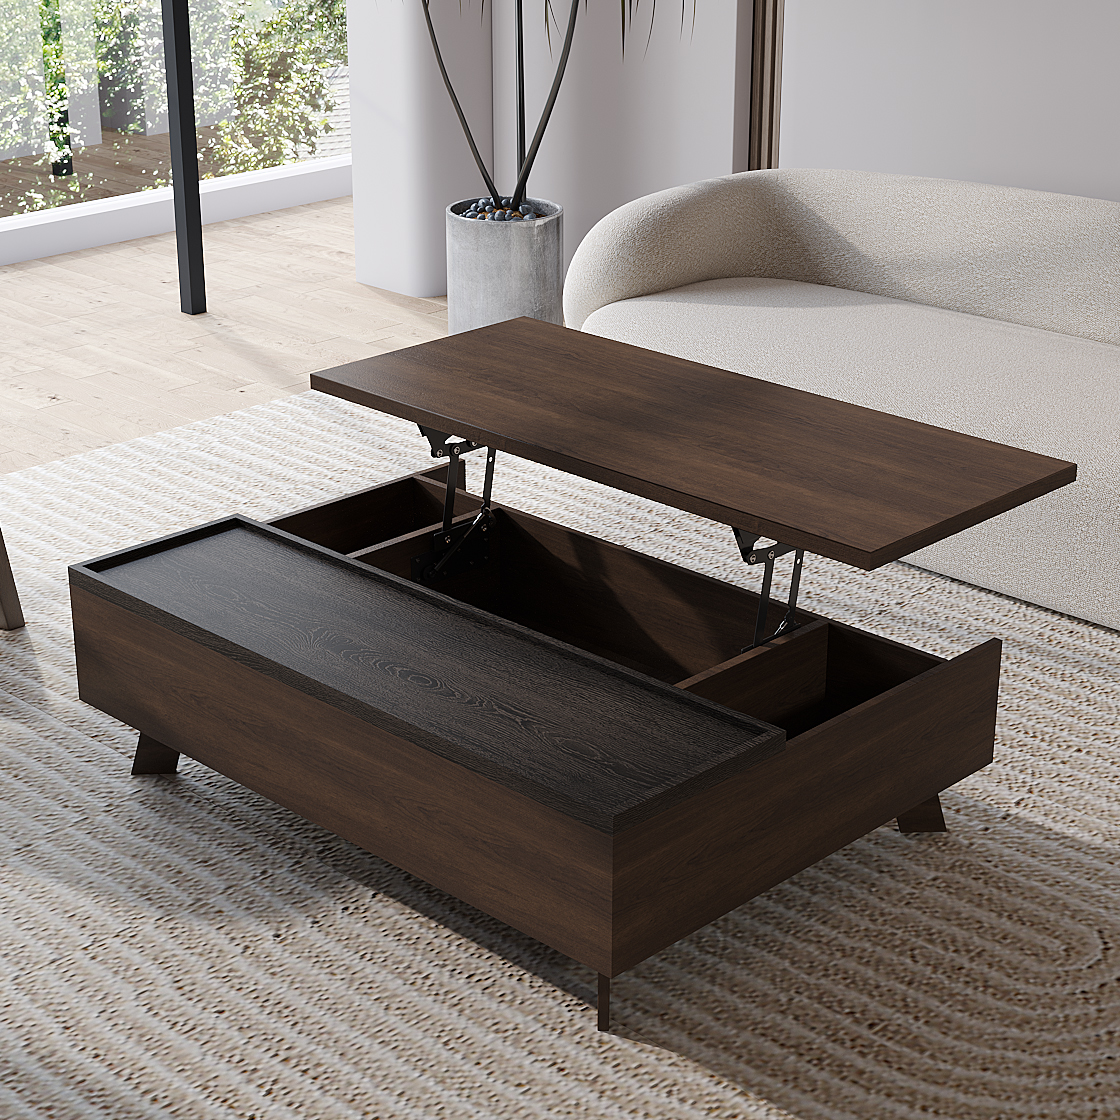 43.3 Stylish Convertible Coffee Table with Storage